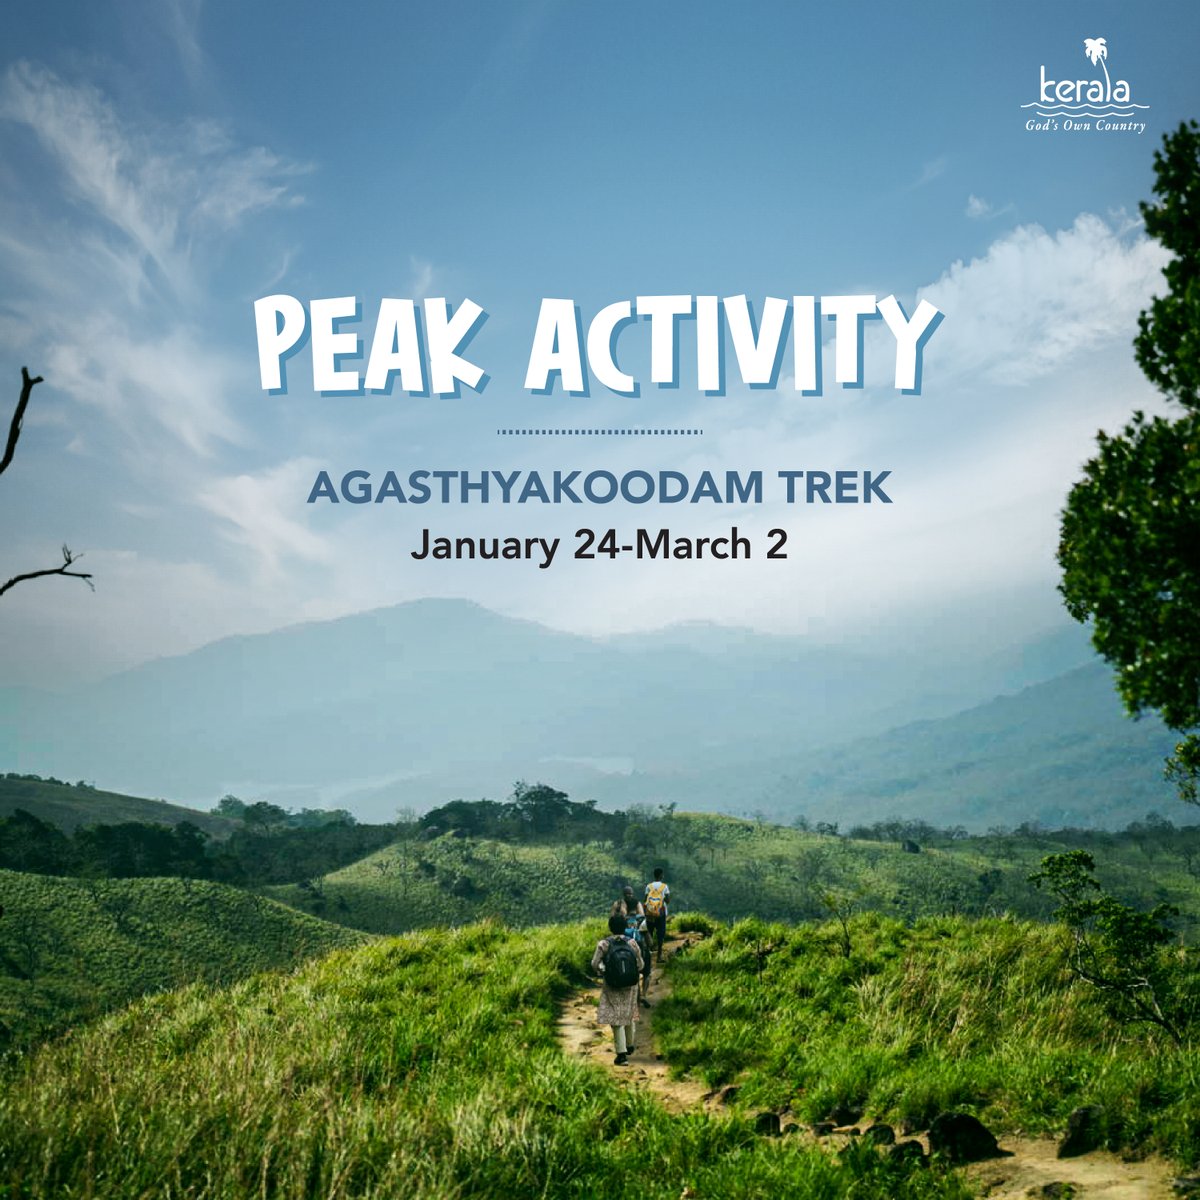 Agasthyakoodam, one of the highest peaks in Kerala, is open for trekking from January 24 to March 2. This bird watcher’s paradise is known for its trove of medicinal herbs. Pilgrims also undertake this difficult trek to visit the hill shrine dedicated to sage Agasthya. The number…